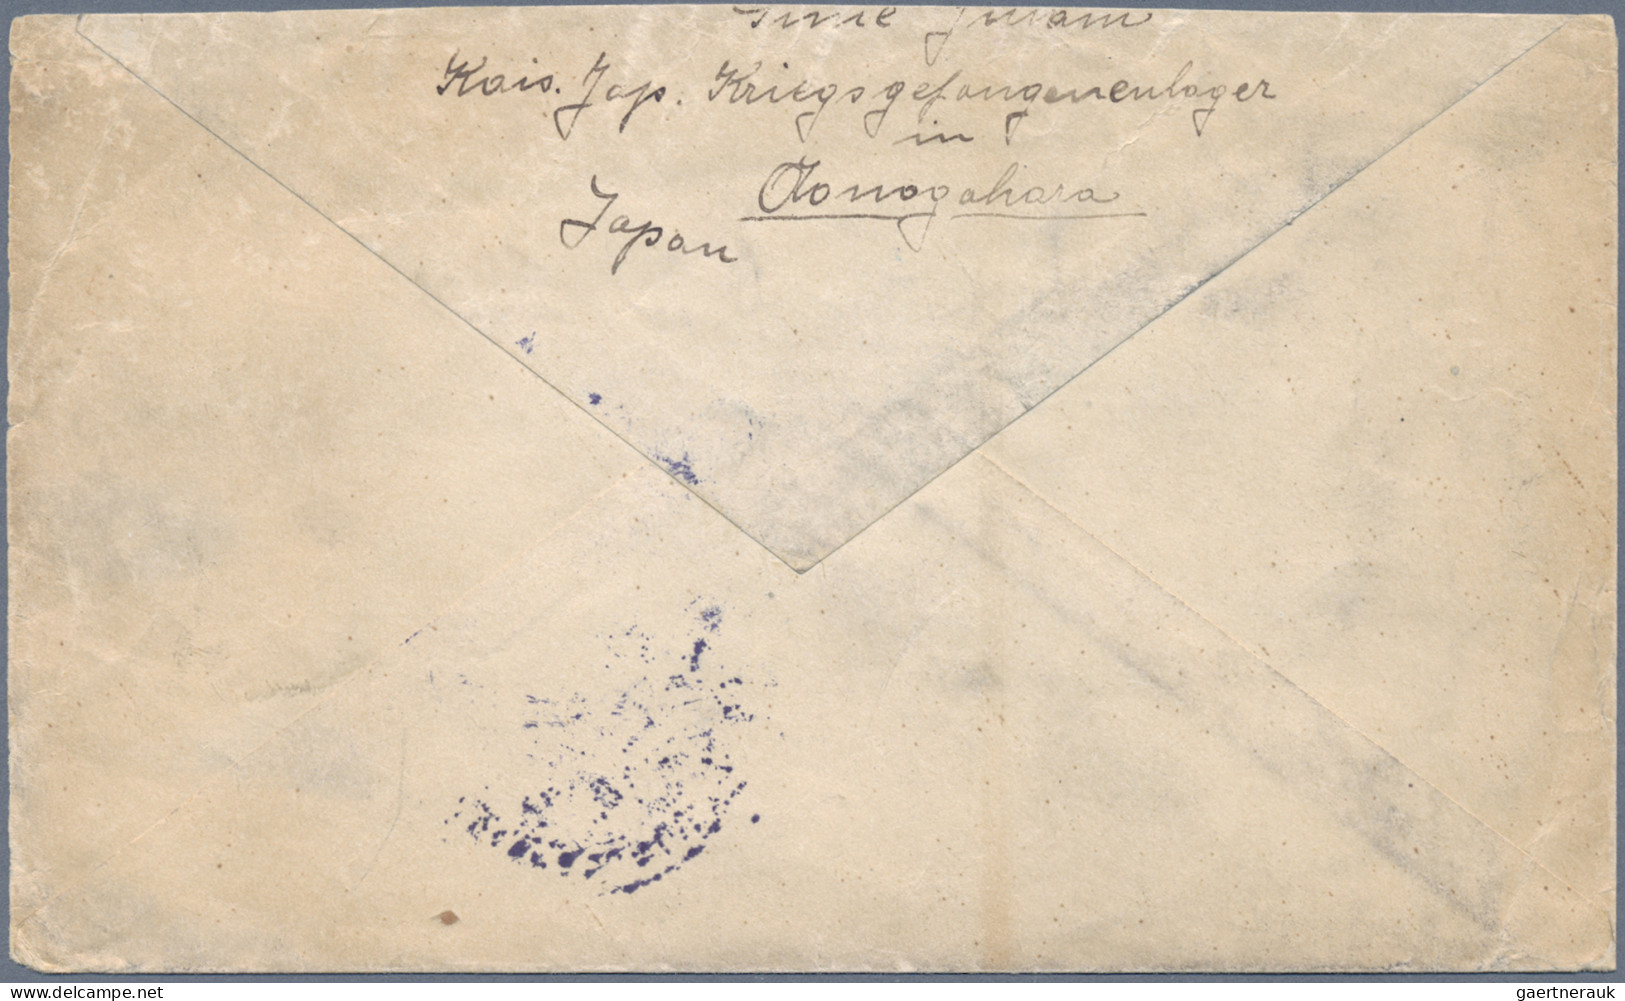 Camp Mail Tsingtau: Aonogahara, 1917 (ca.) Cover With Large Blue Camp Seal And H - China (offices)